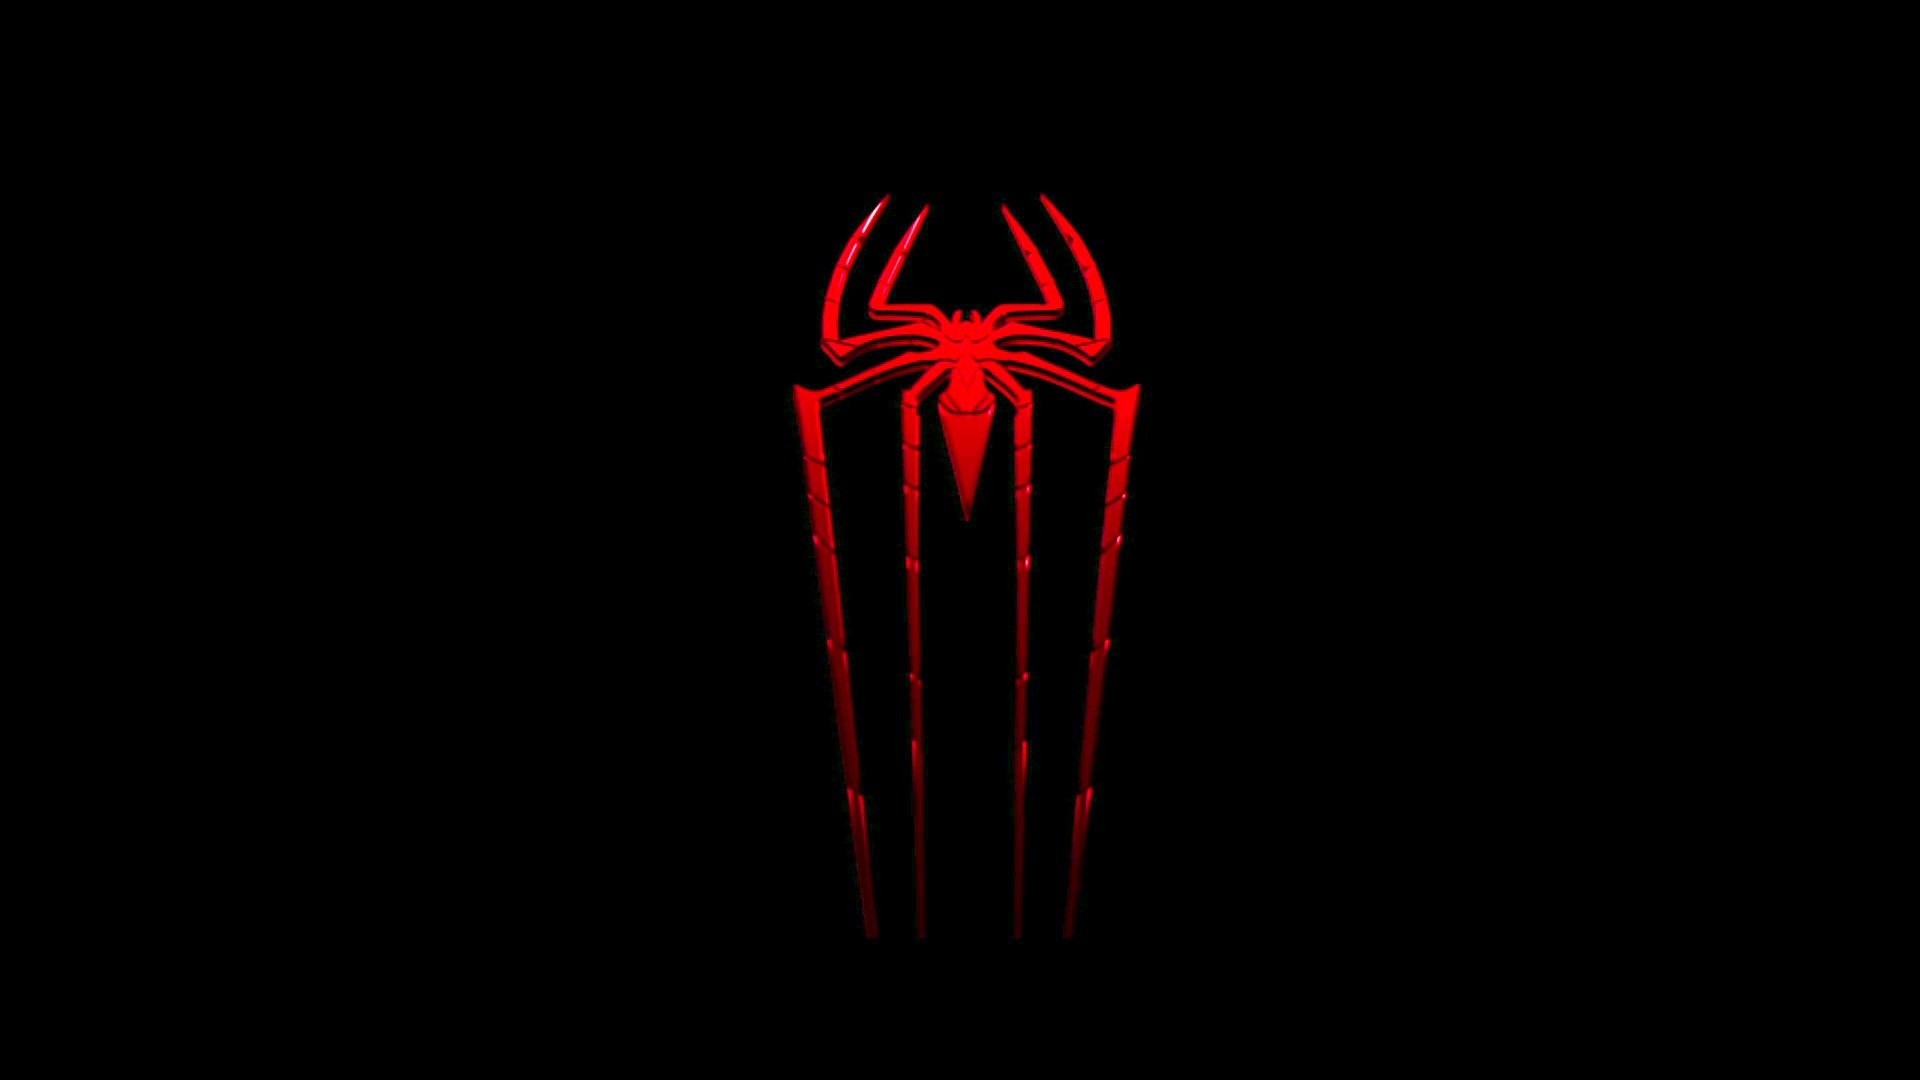 1920x1080 Image for Black Spiderman Logo Cool Wallpapers